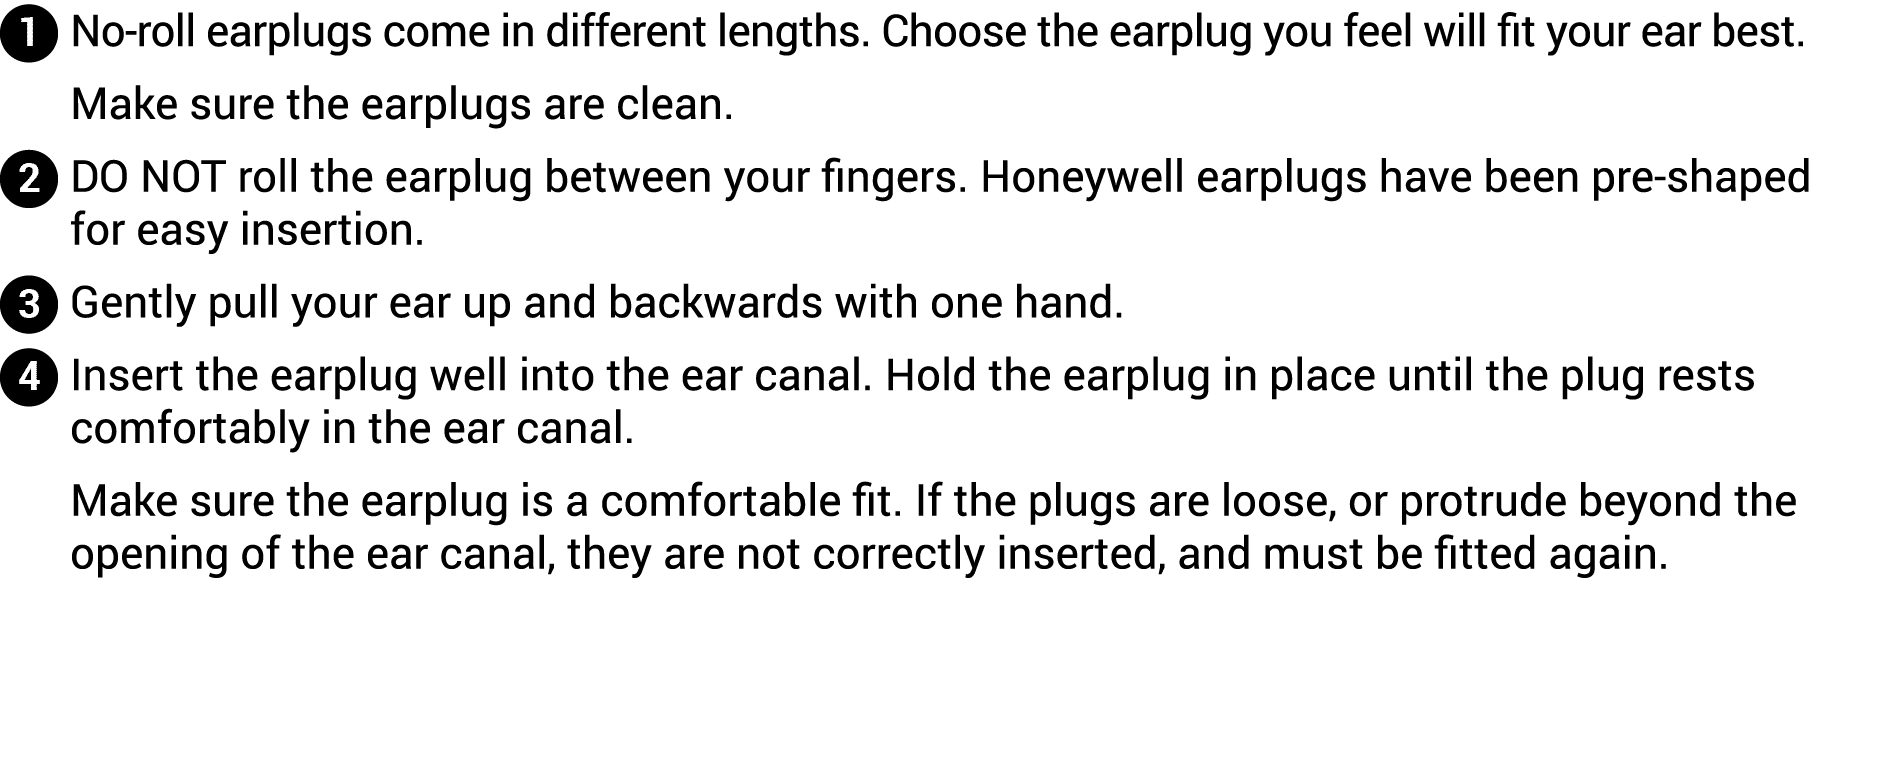  No-roll earplugs come in different lengths  Choose the earplug you feel will fit your ear best  Make sure the earplu   